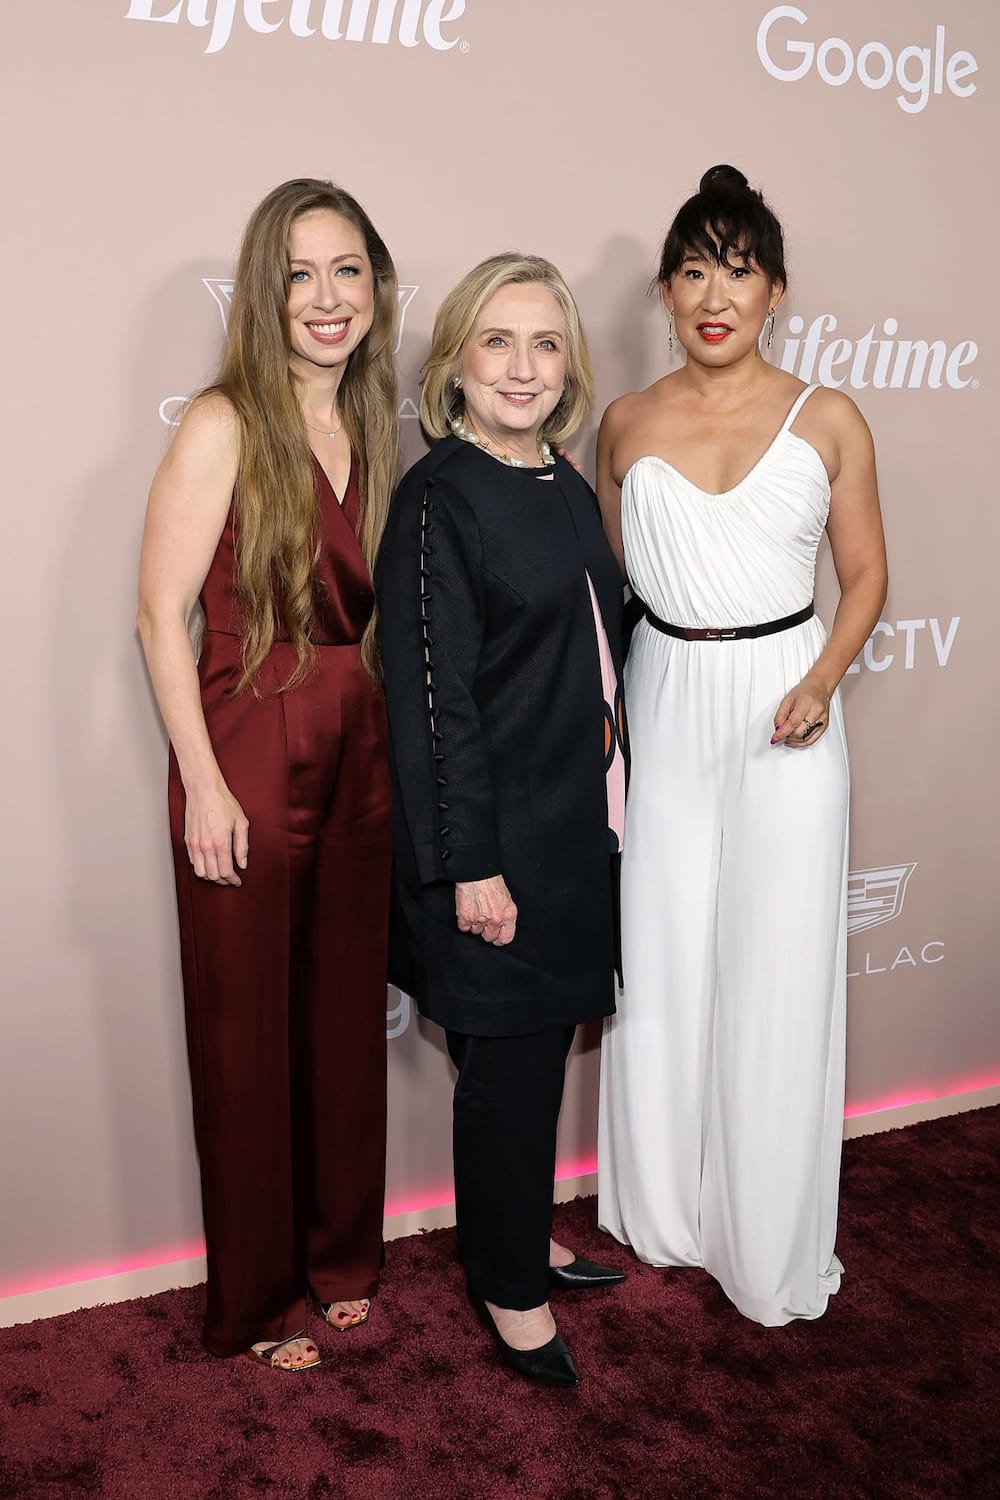 Sandra Oh With Hillary Clinton and her daughter Chelsea Clinton on the red carpet.